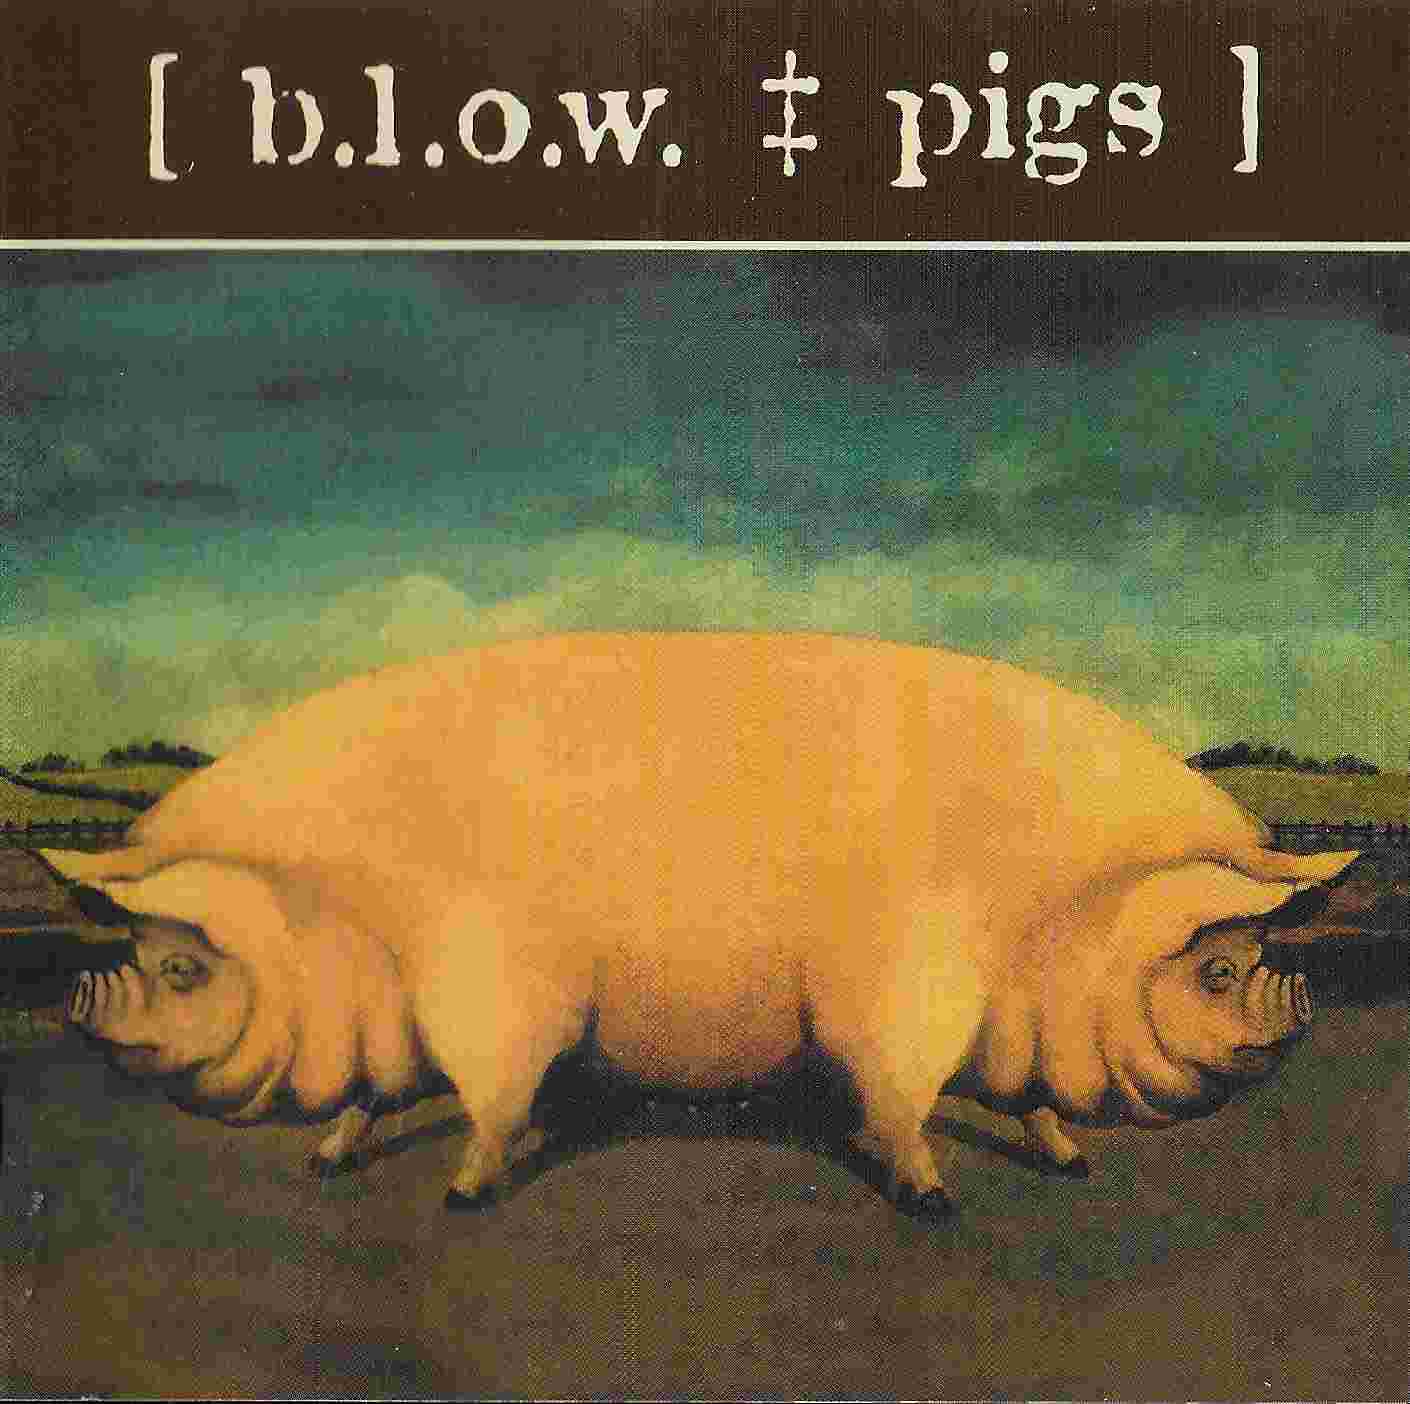 Picture of Pigs by artist B. L. O. W. 